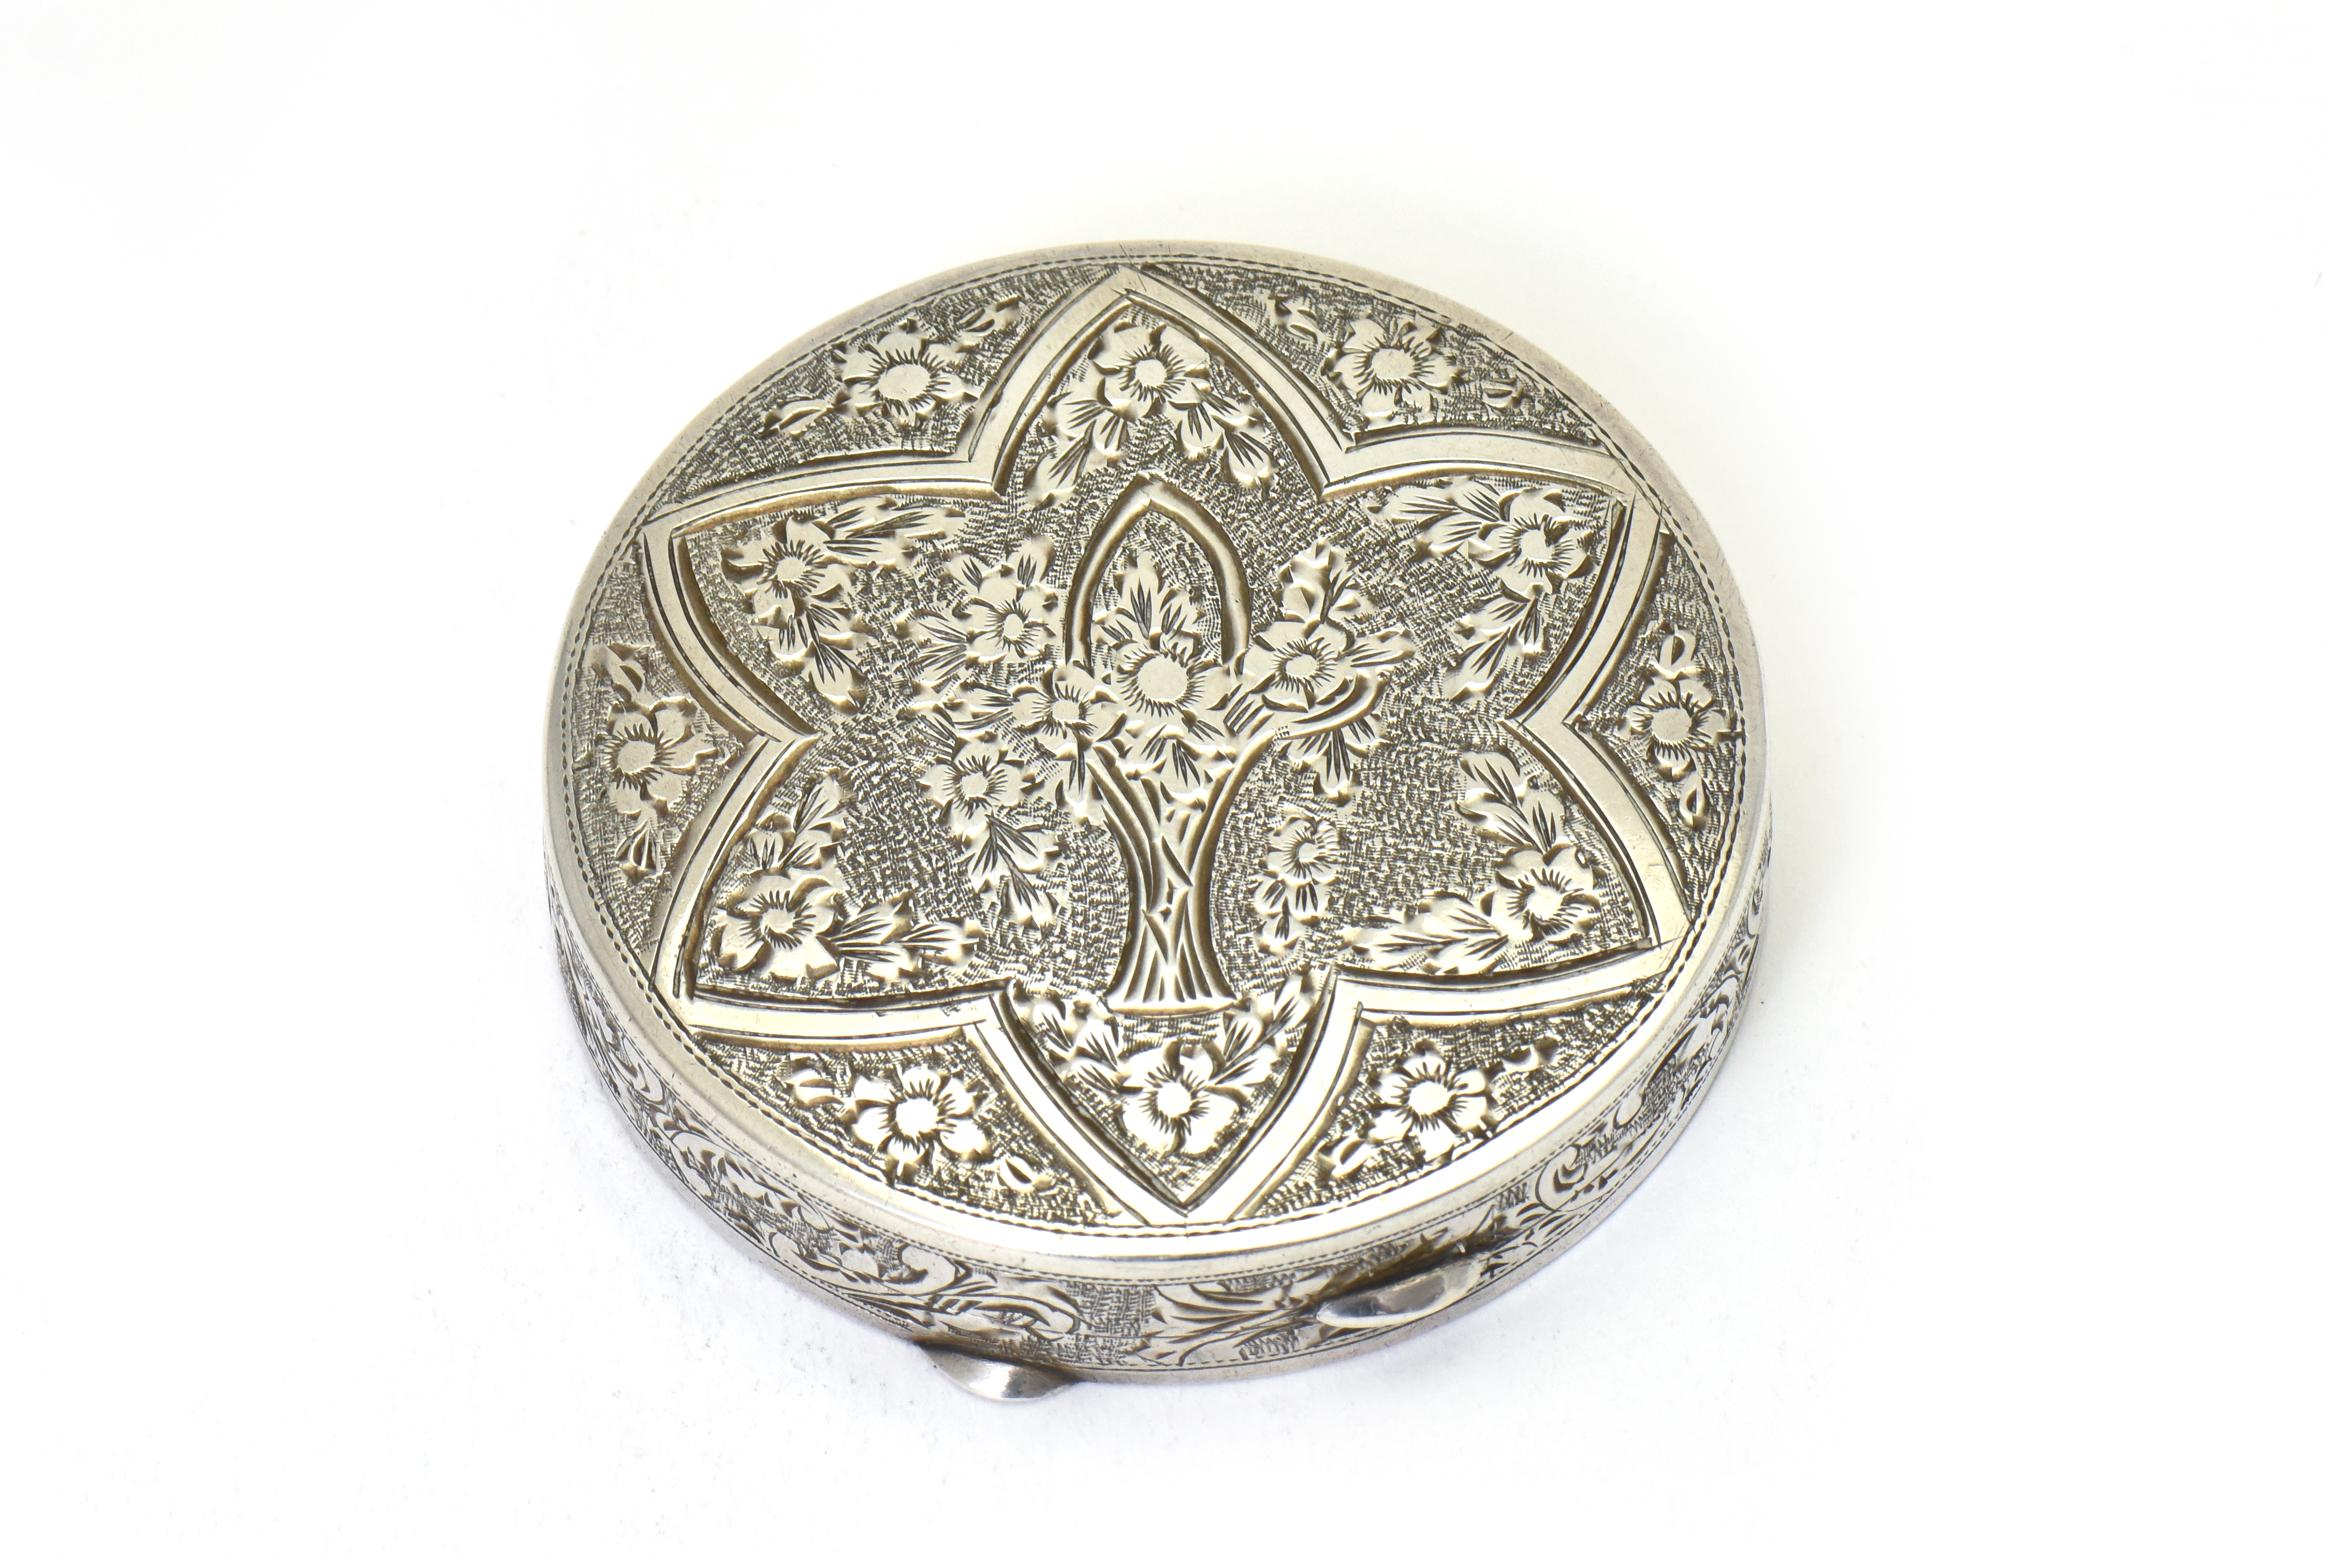 Beautifully made hinged silver compact featuring a floral design on the top section with a flower basket in the middle of a floral wreath and star. There are more flowers on the outer edge. Inside is a beveled glass mirror with a twist rope border,